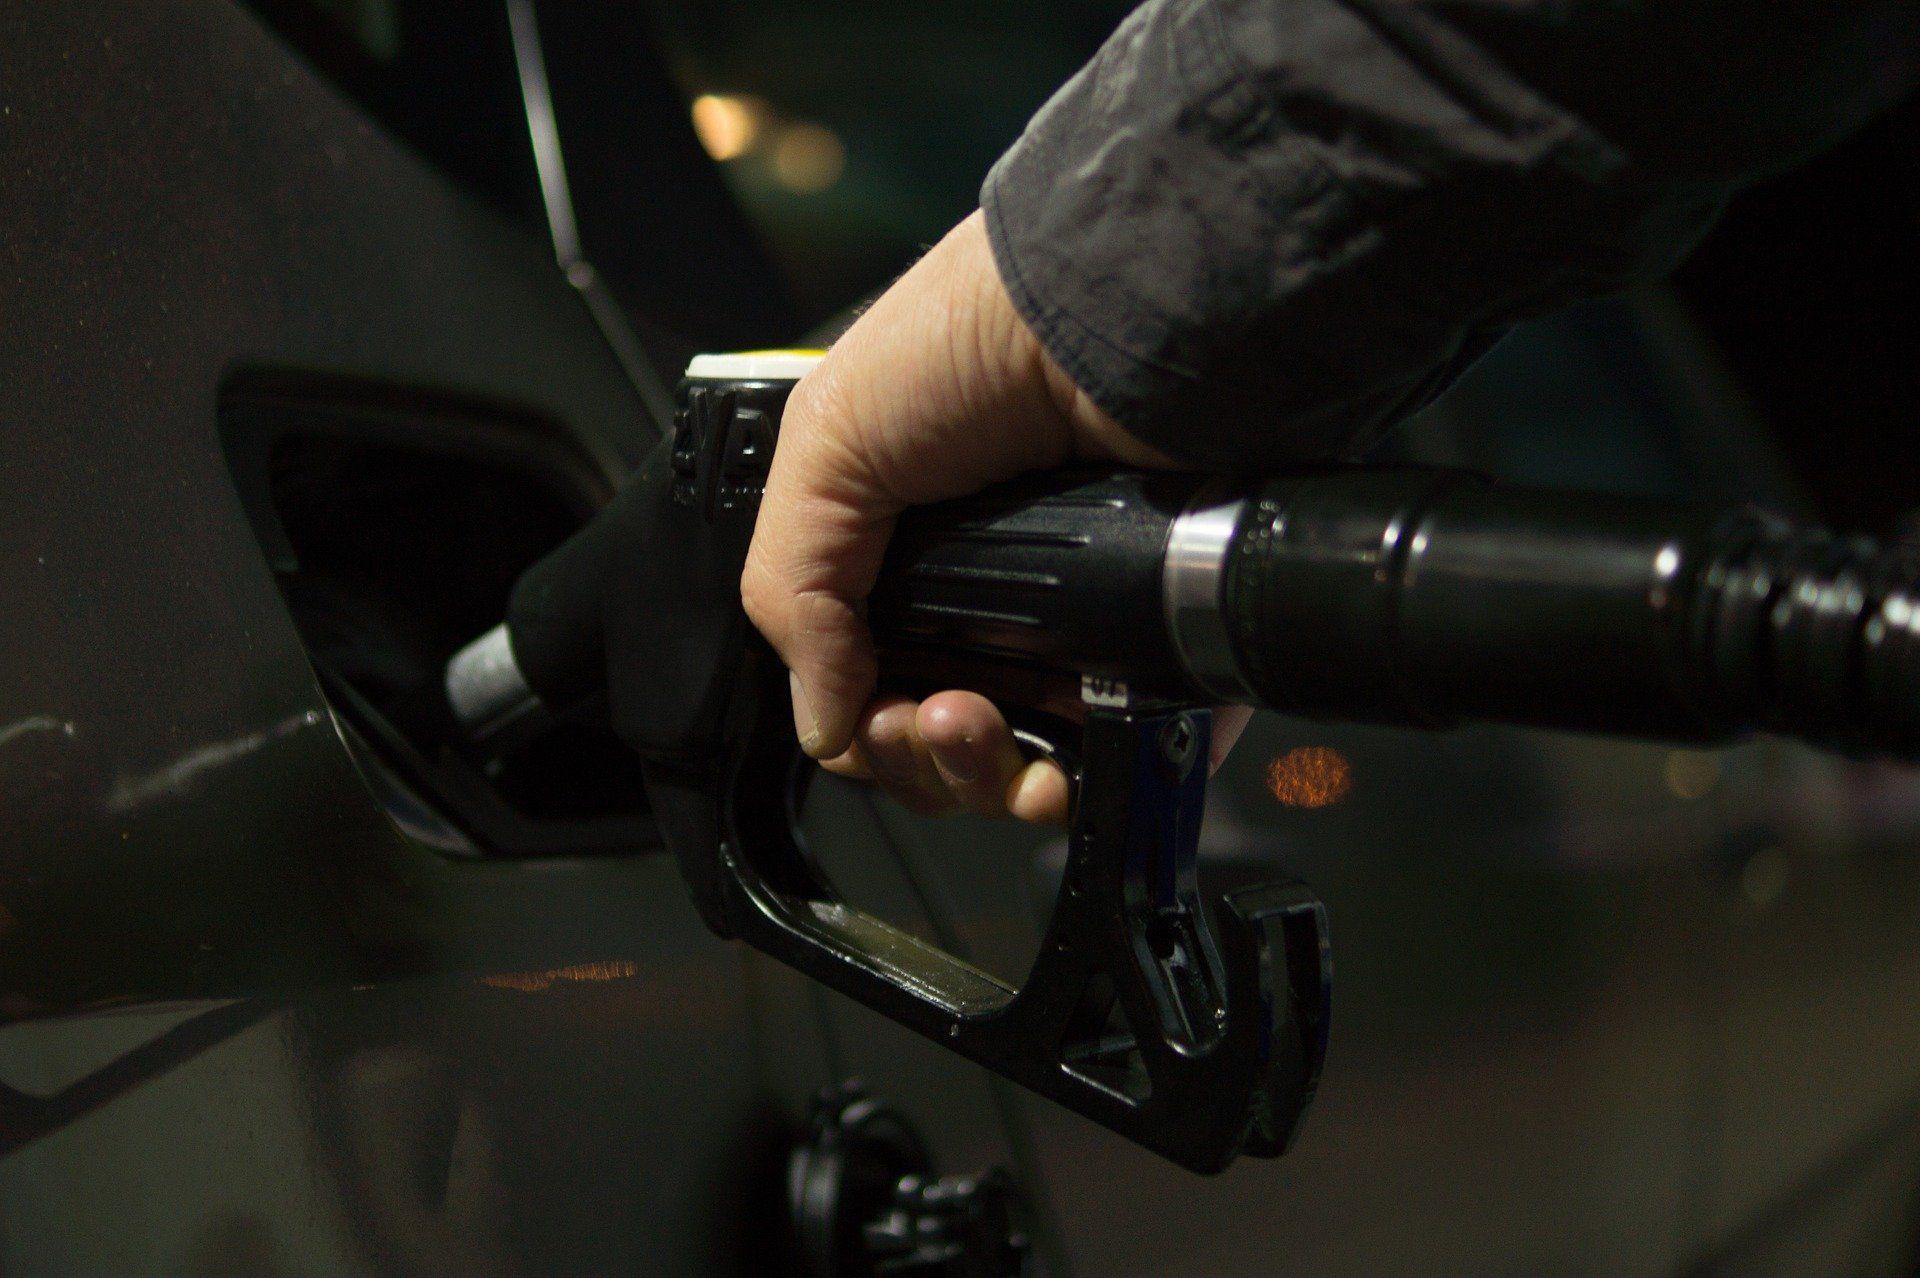 Fuel price today: Petrol and Diesel rates remain unchanged on April 26, 2022